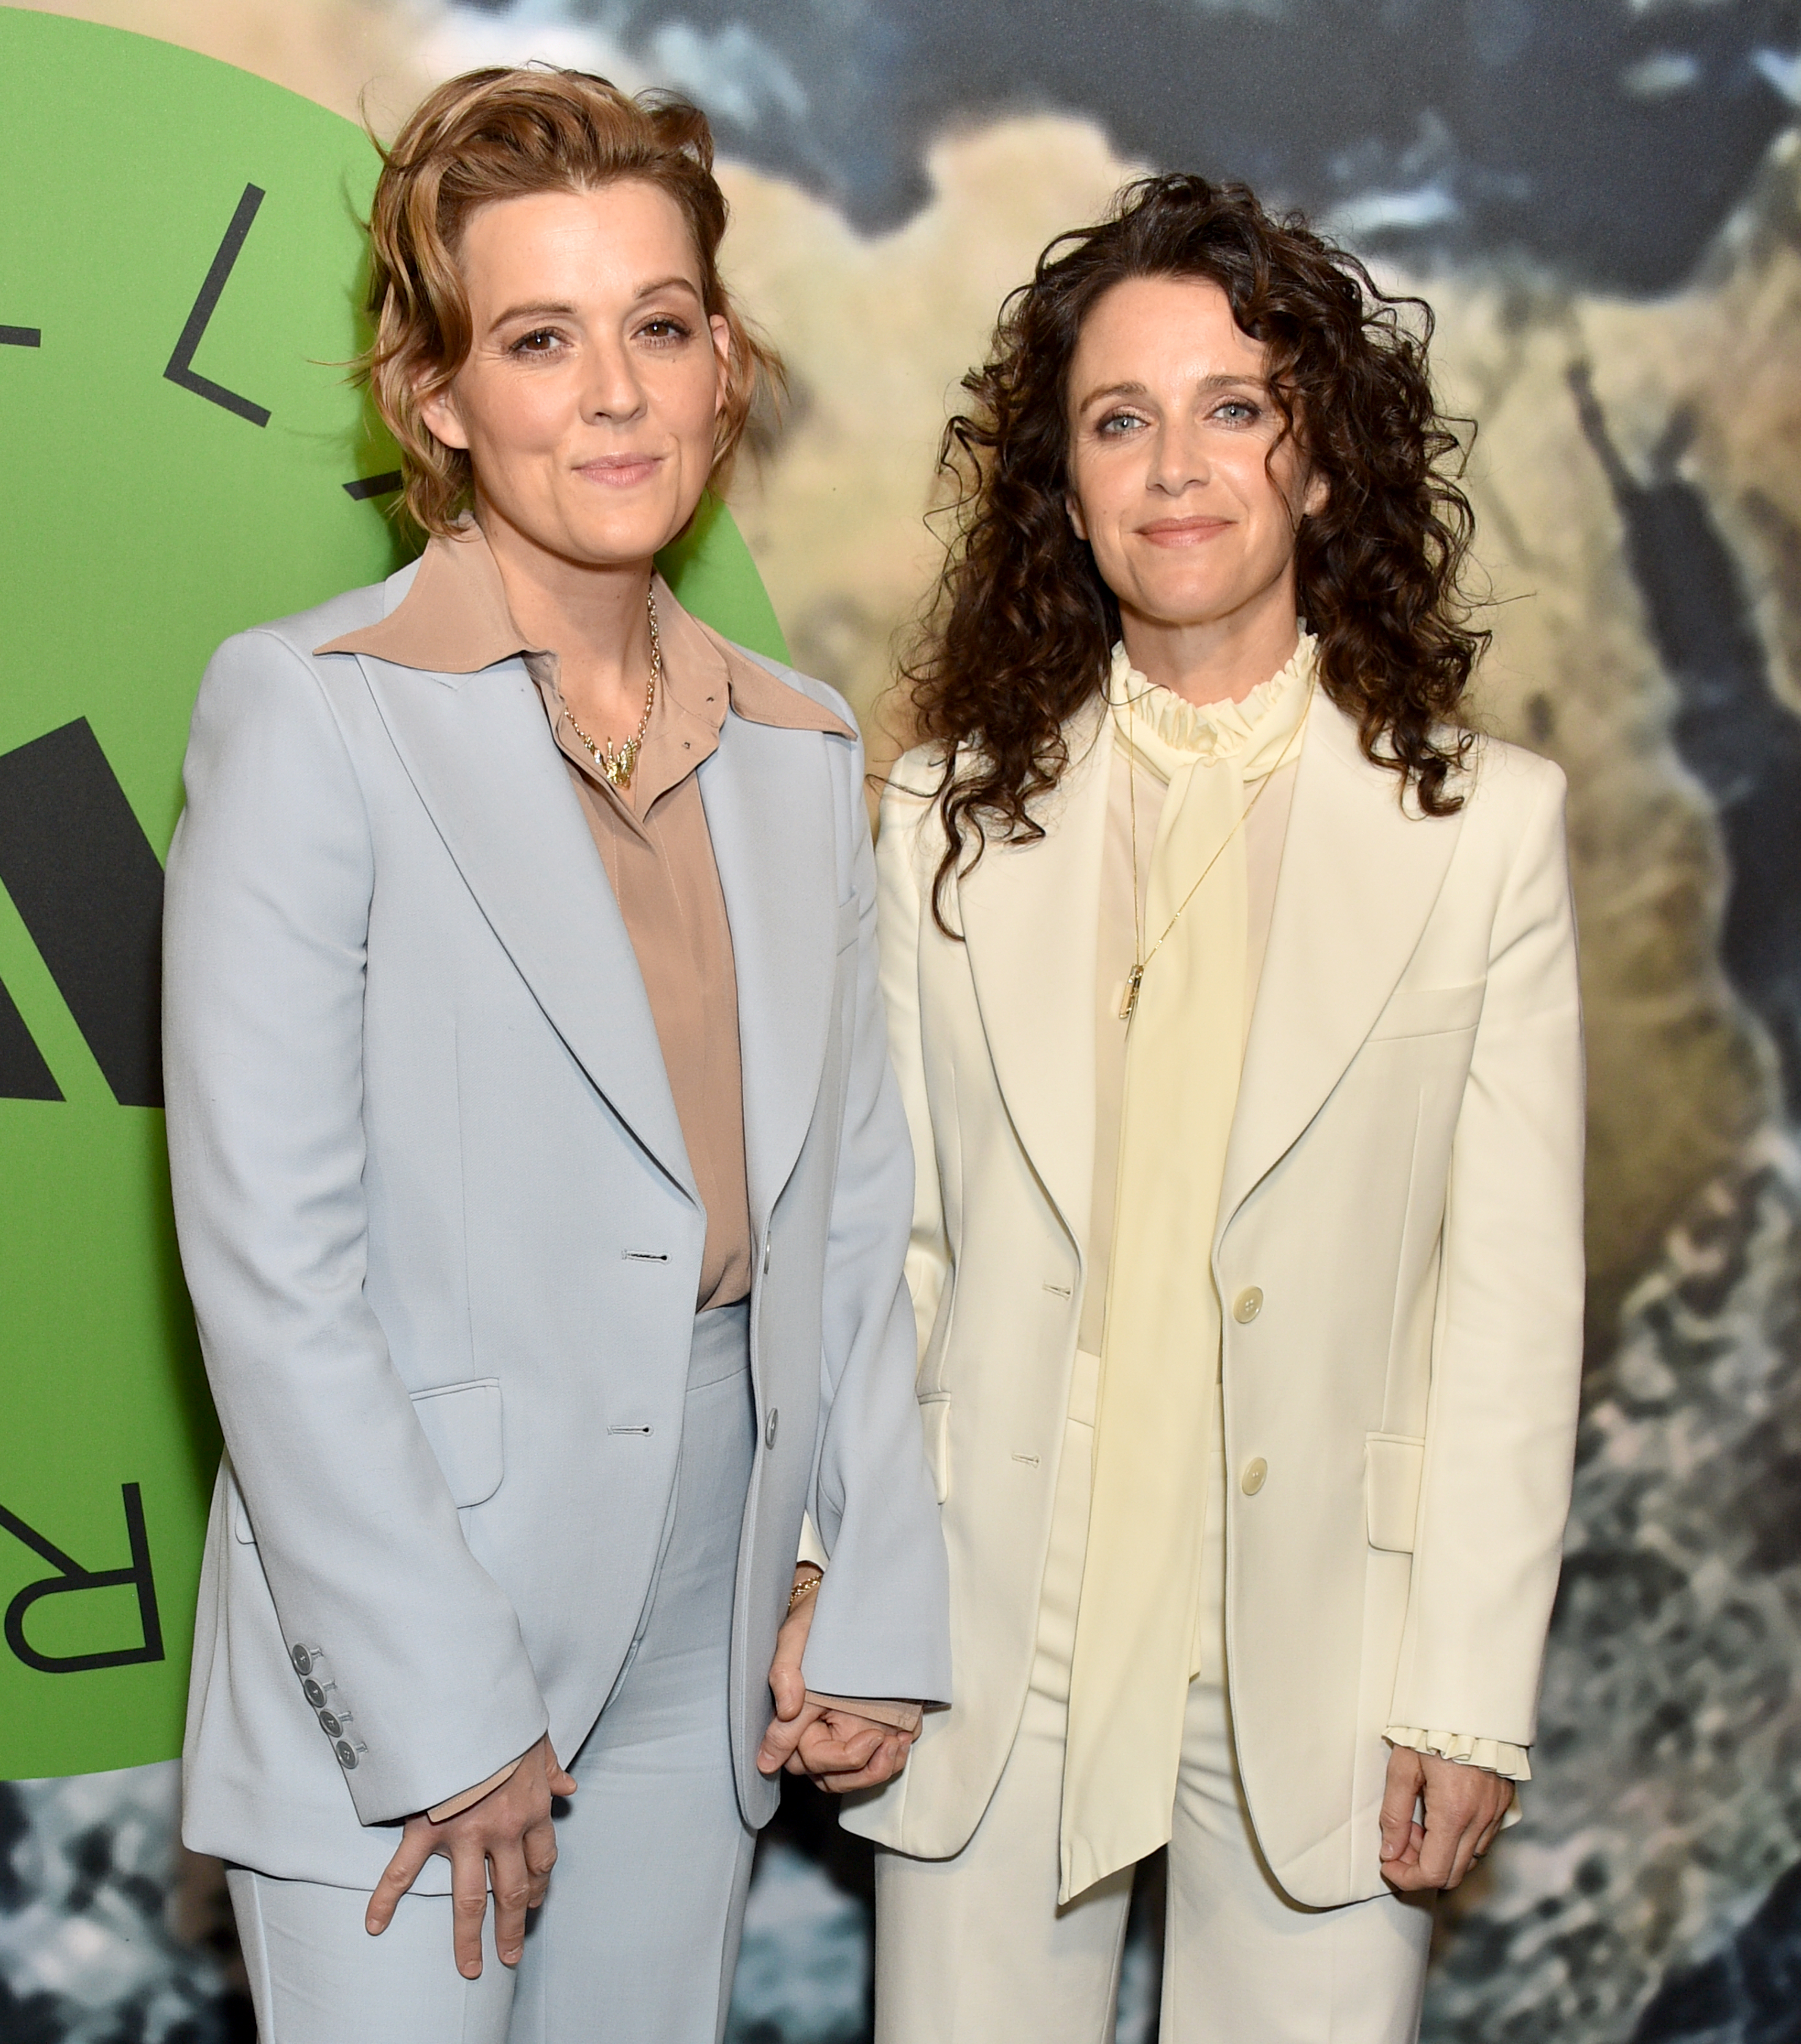 Brandi Carlile and Catherine Shepherd at the Stella McCartney X Adidas Party on February 2, 2023, in Los Angeles, California. | Source: Getty Images